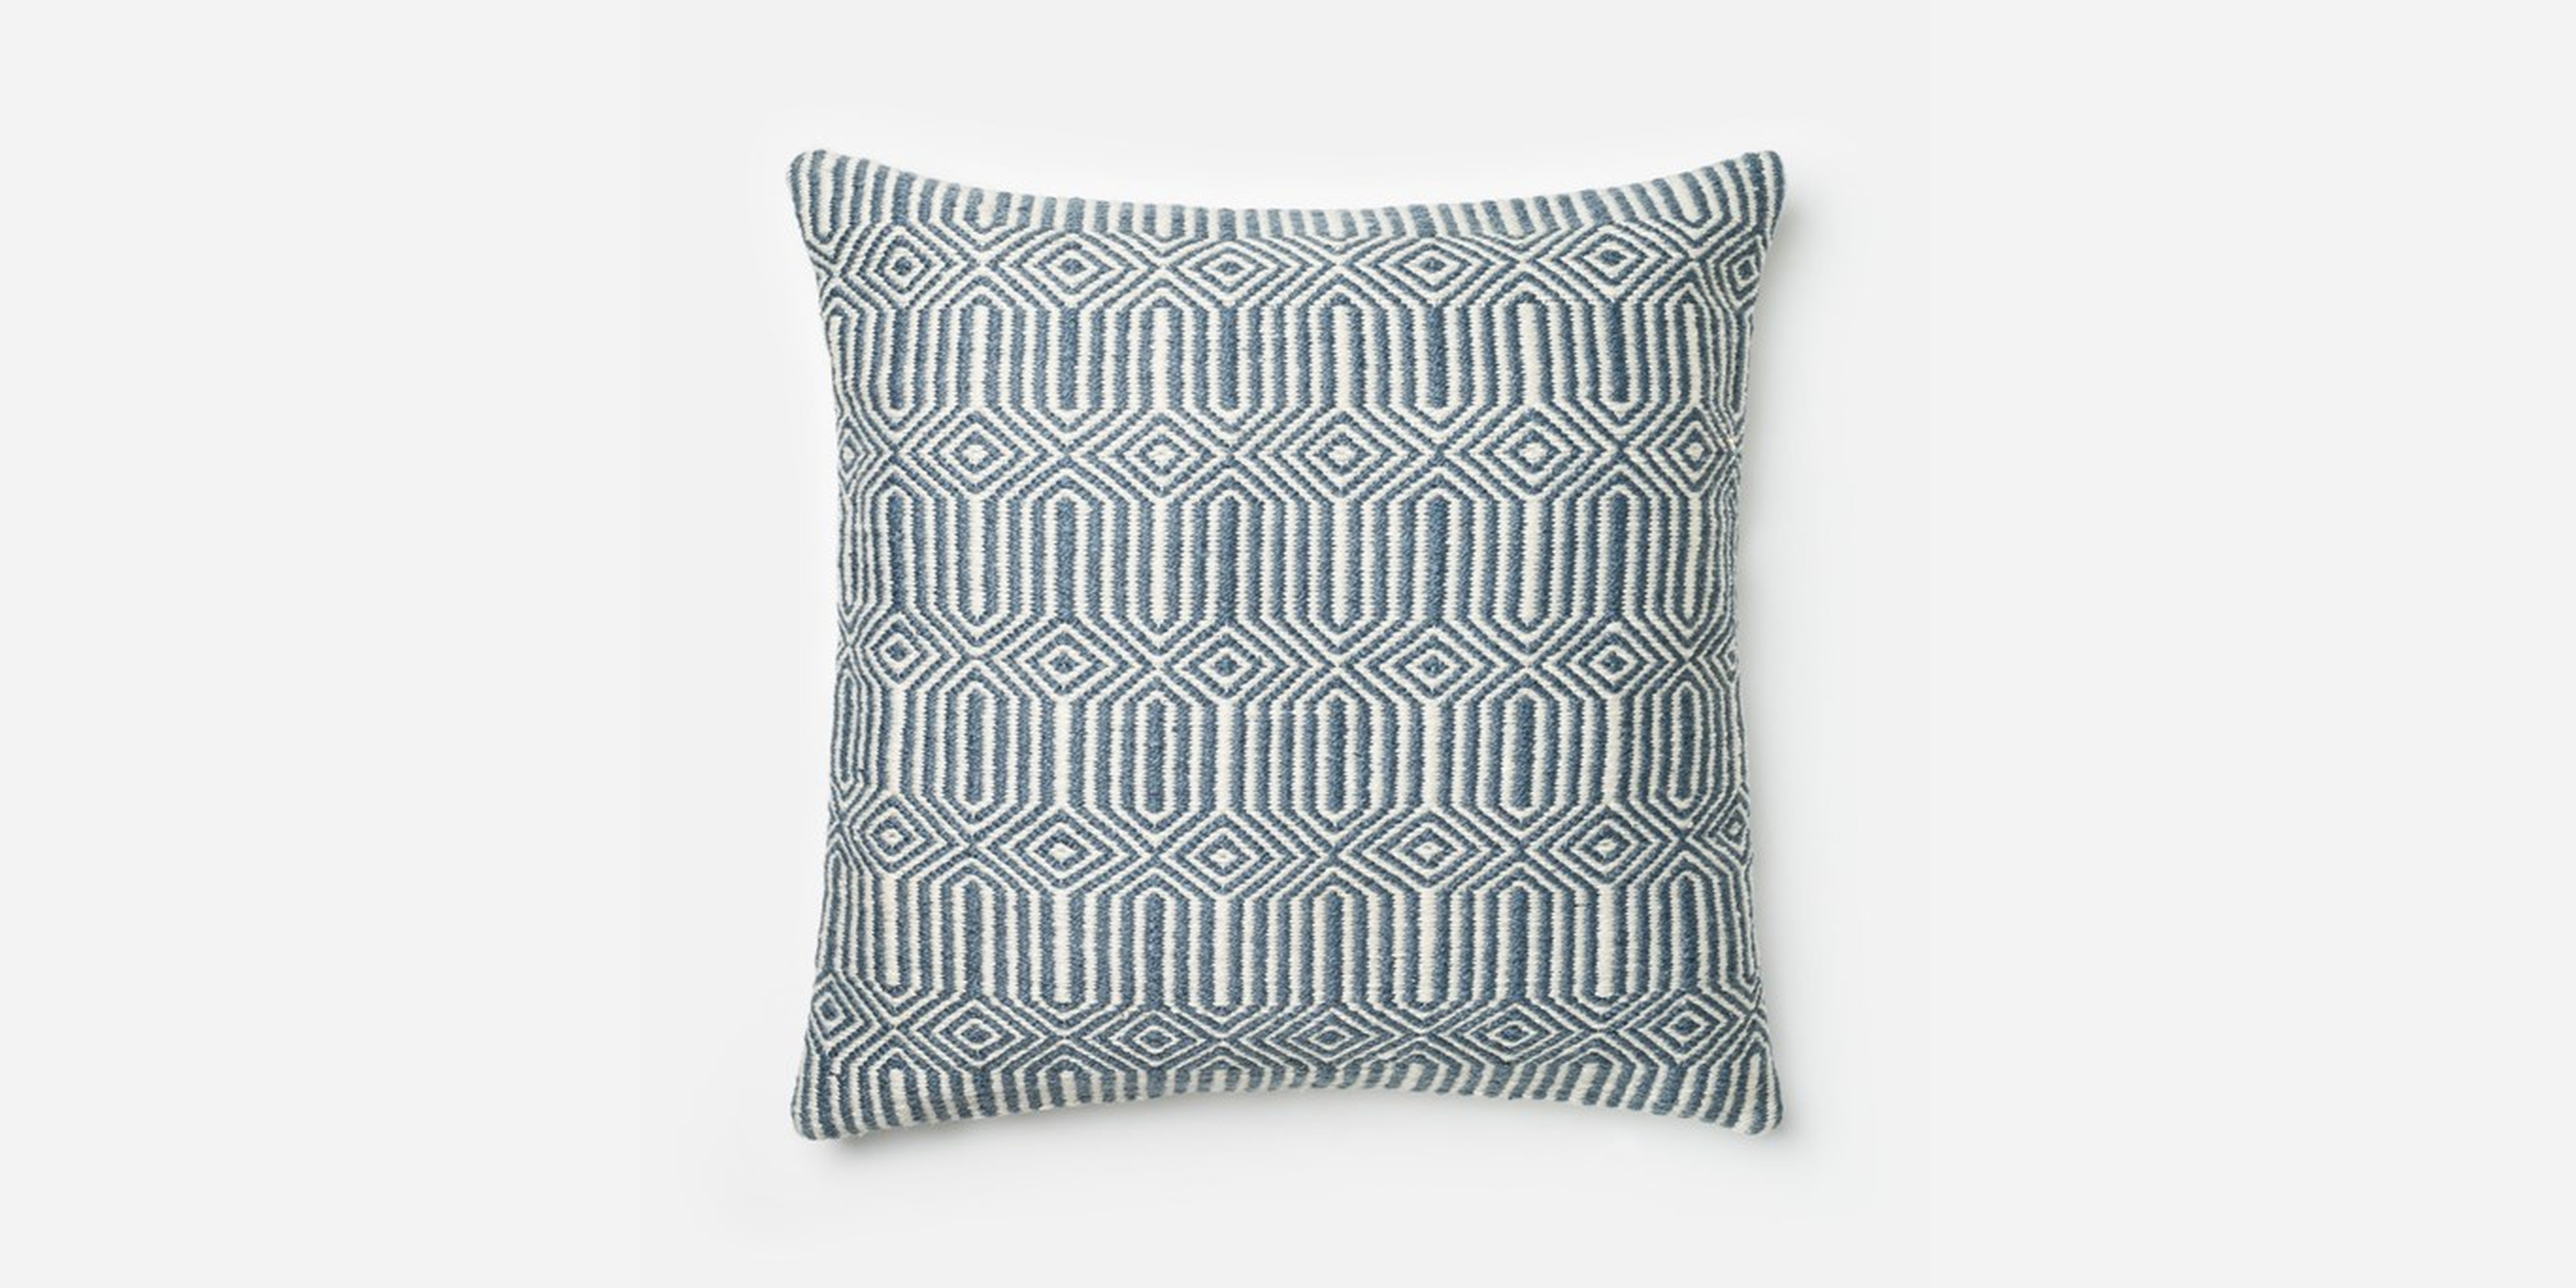 P0339 Blue / Ivory Pillow Cover - 22" x 22" with Poly fill - Loloi Rugs